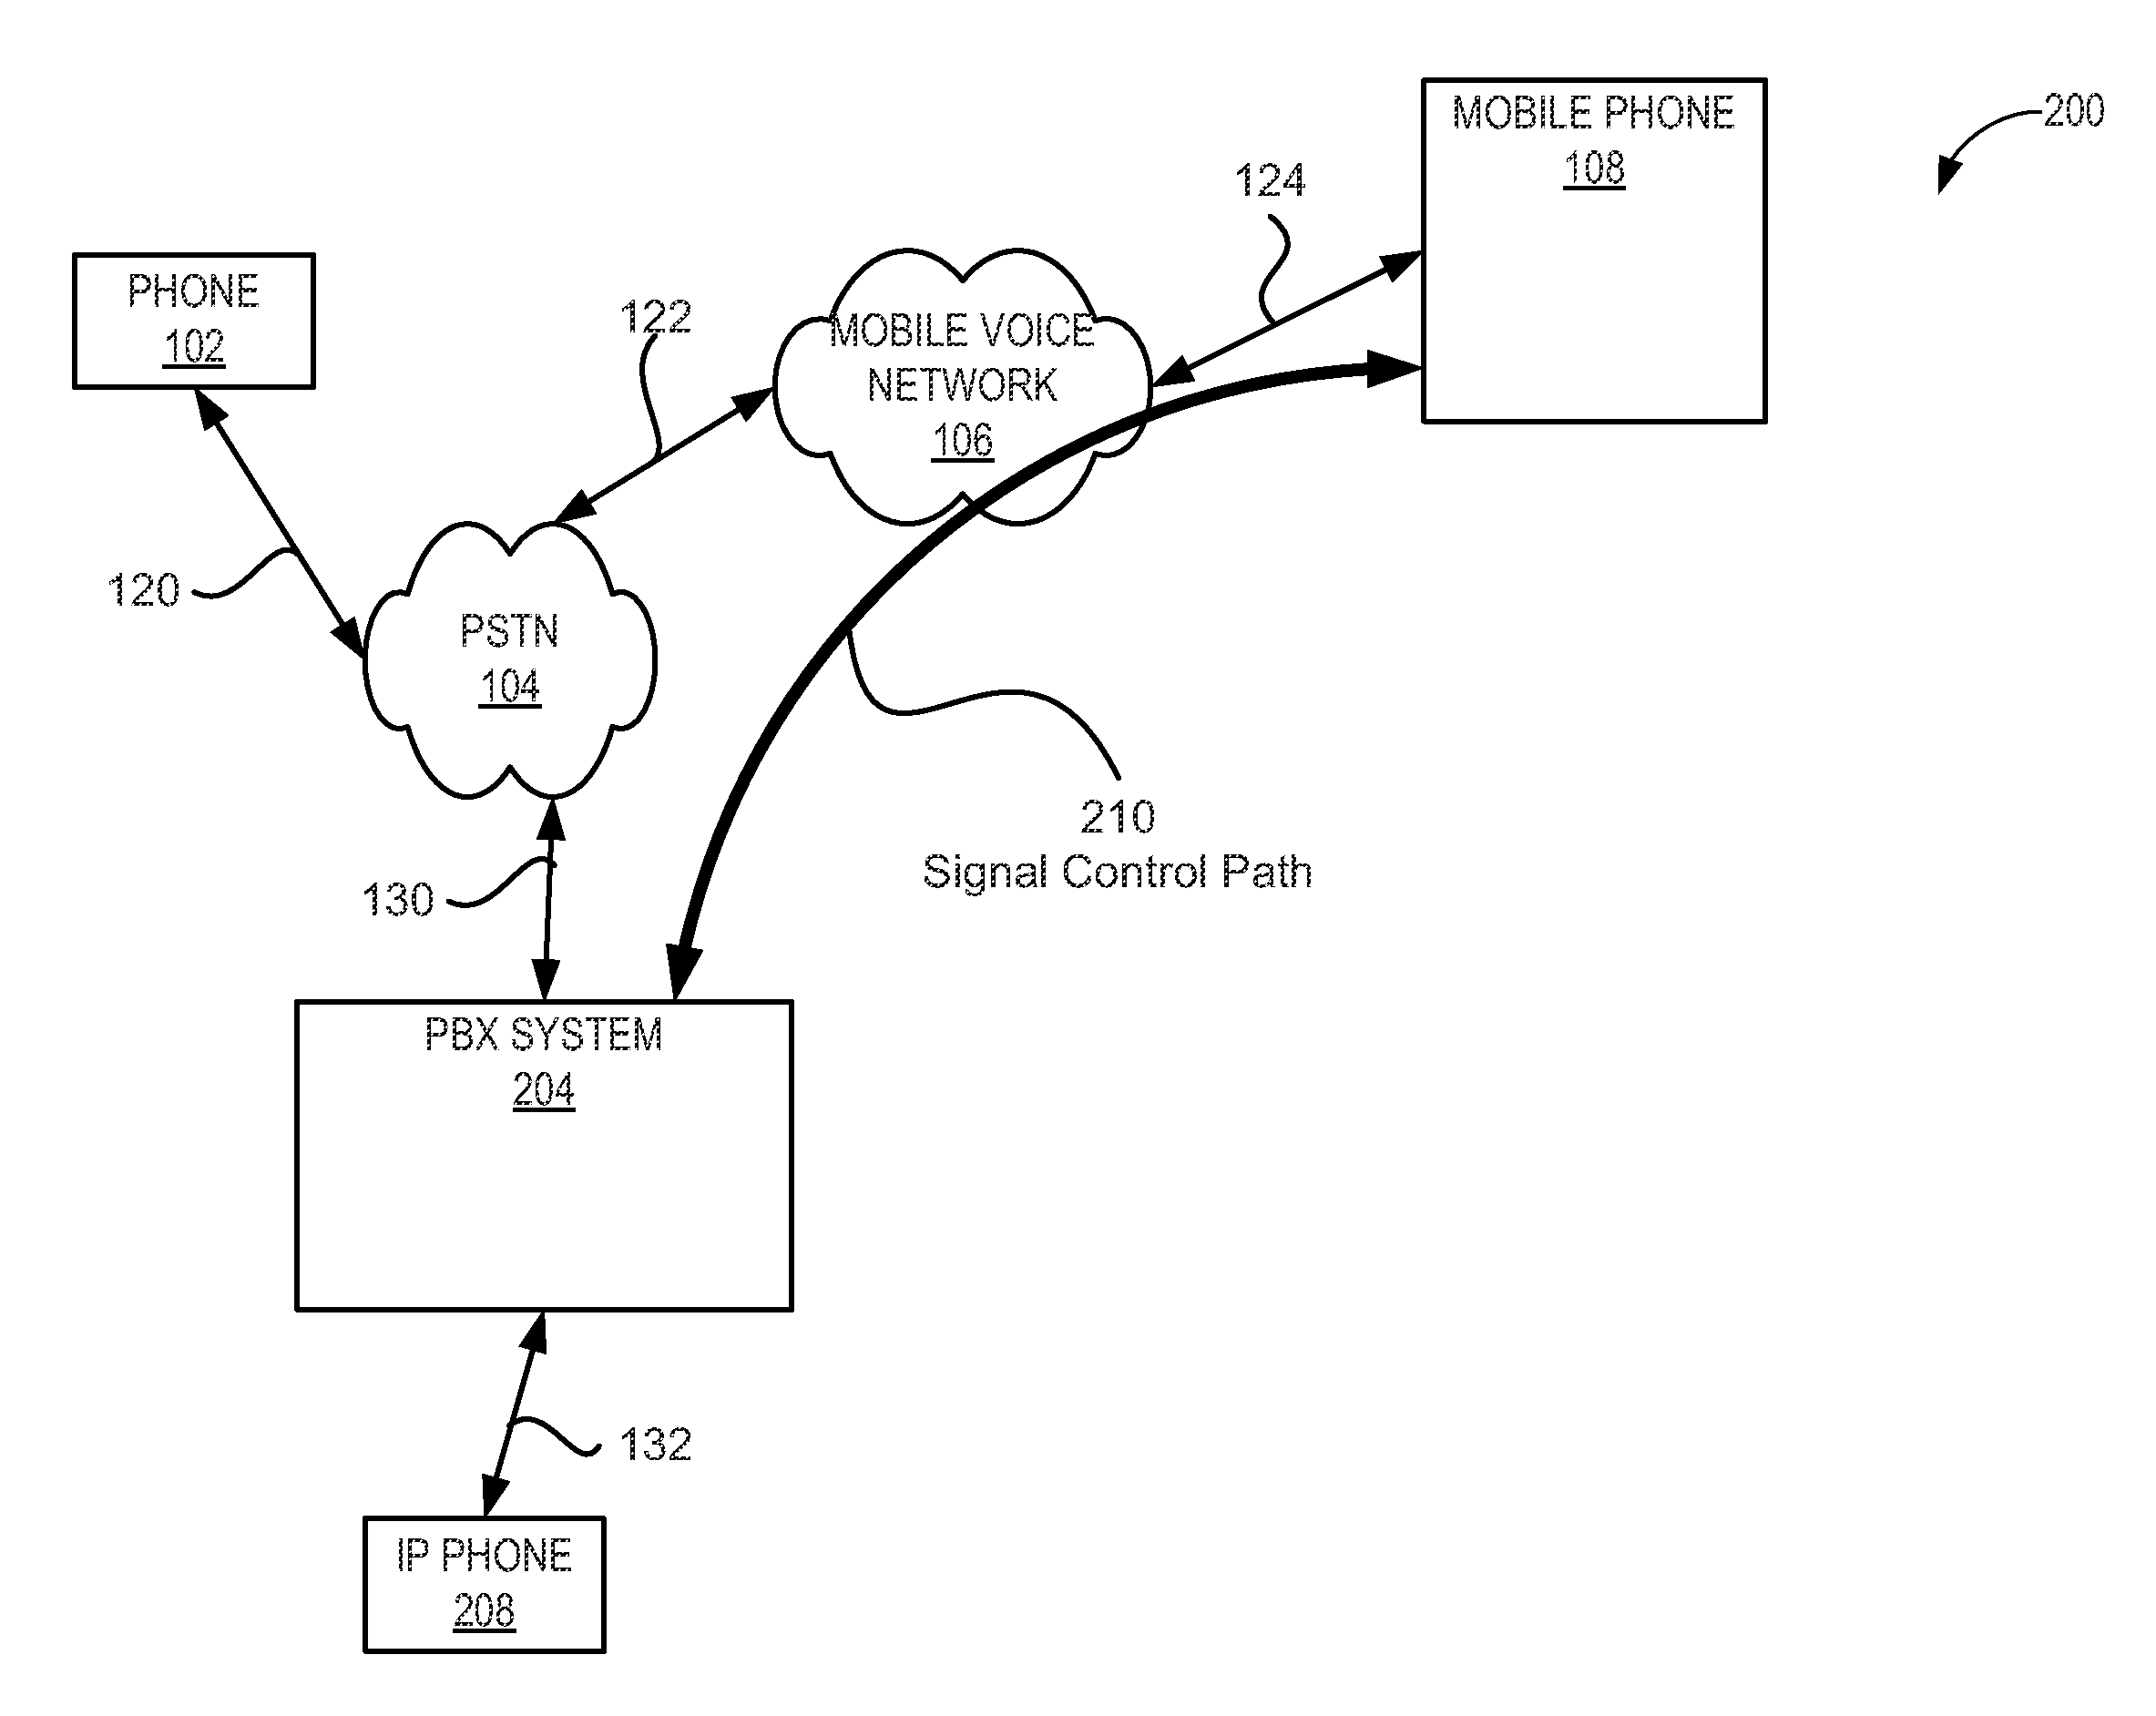 Mobile phone integration with a private branch exchange in a distributed telephony system